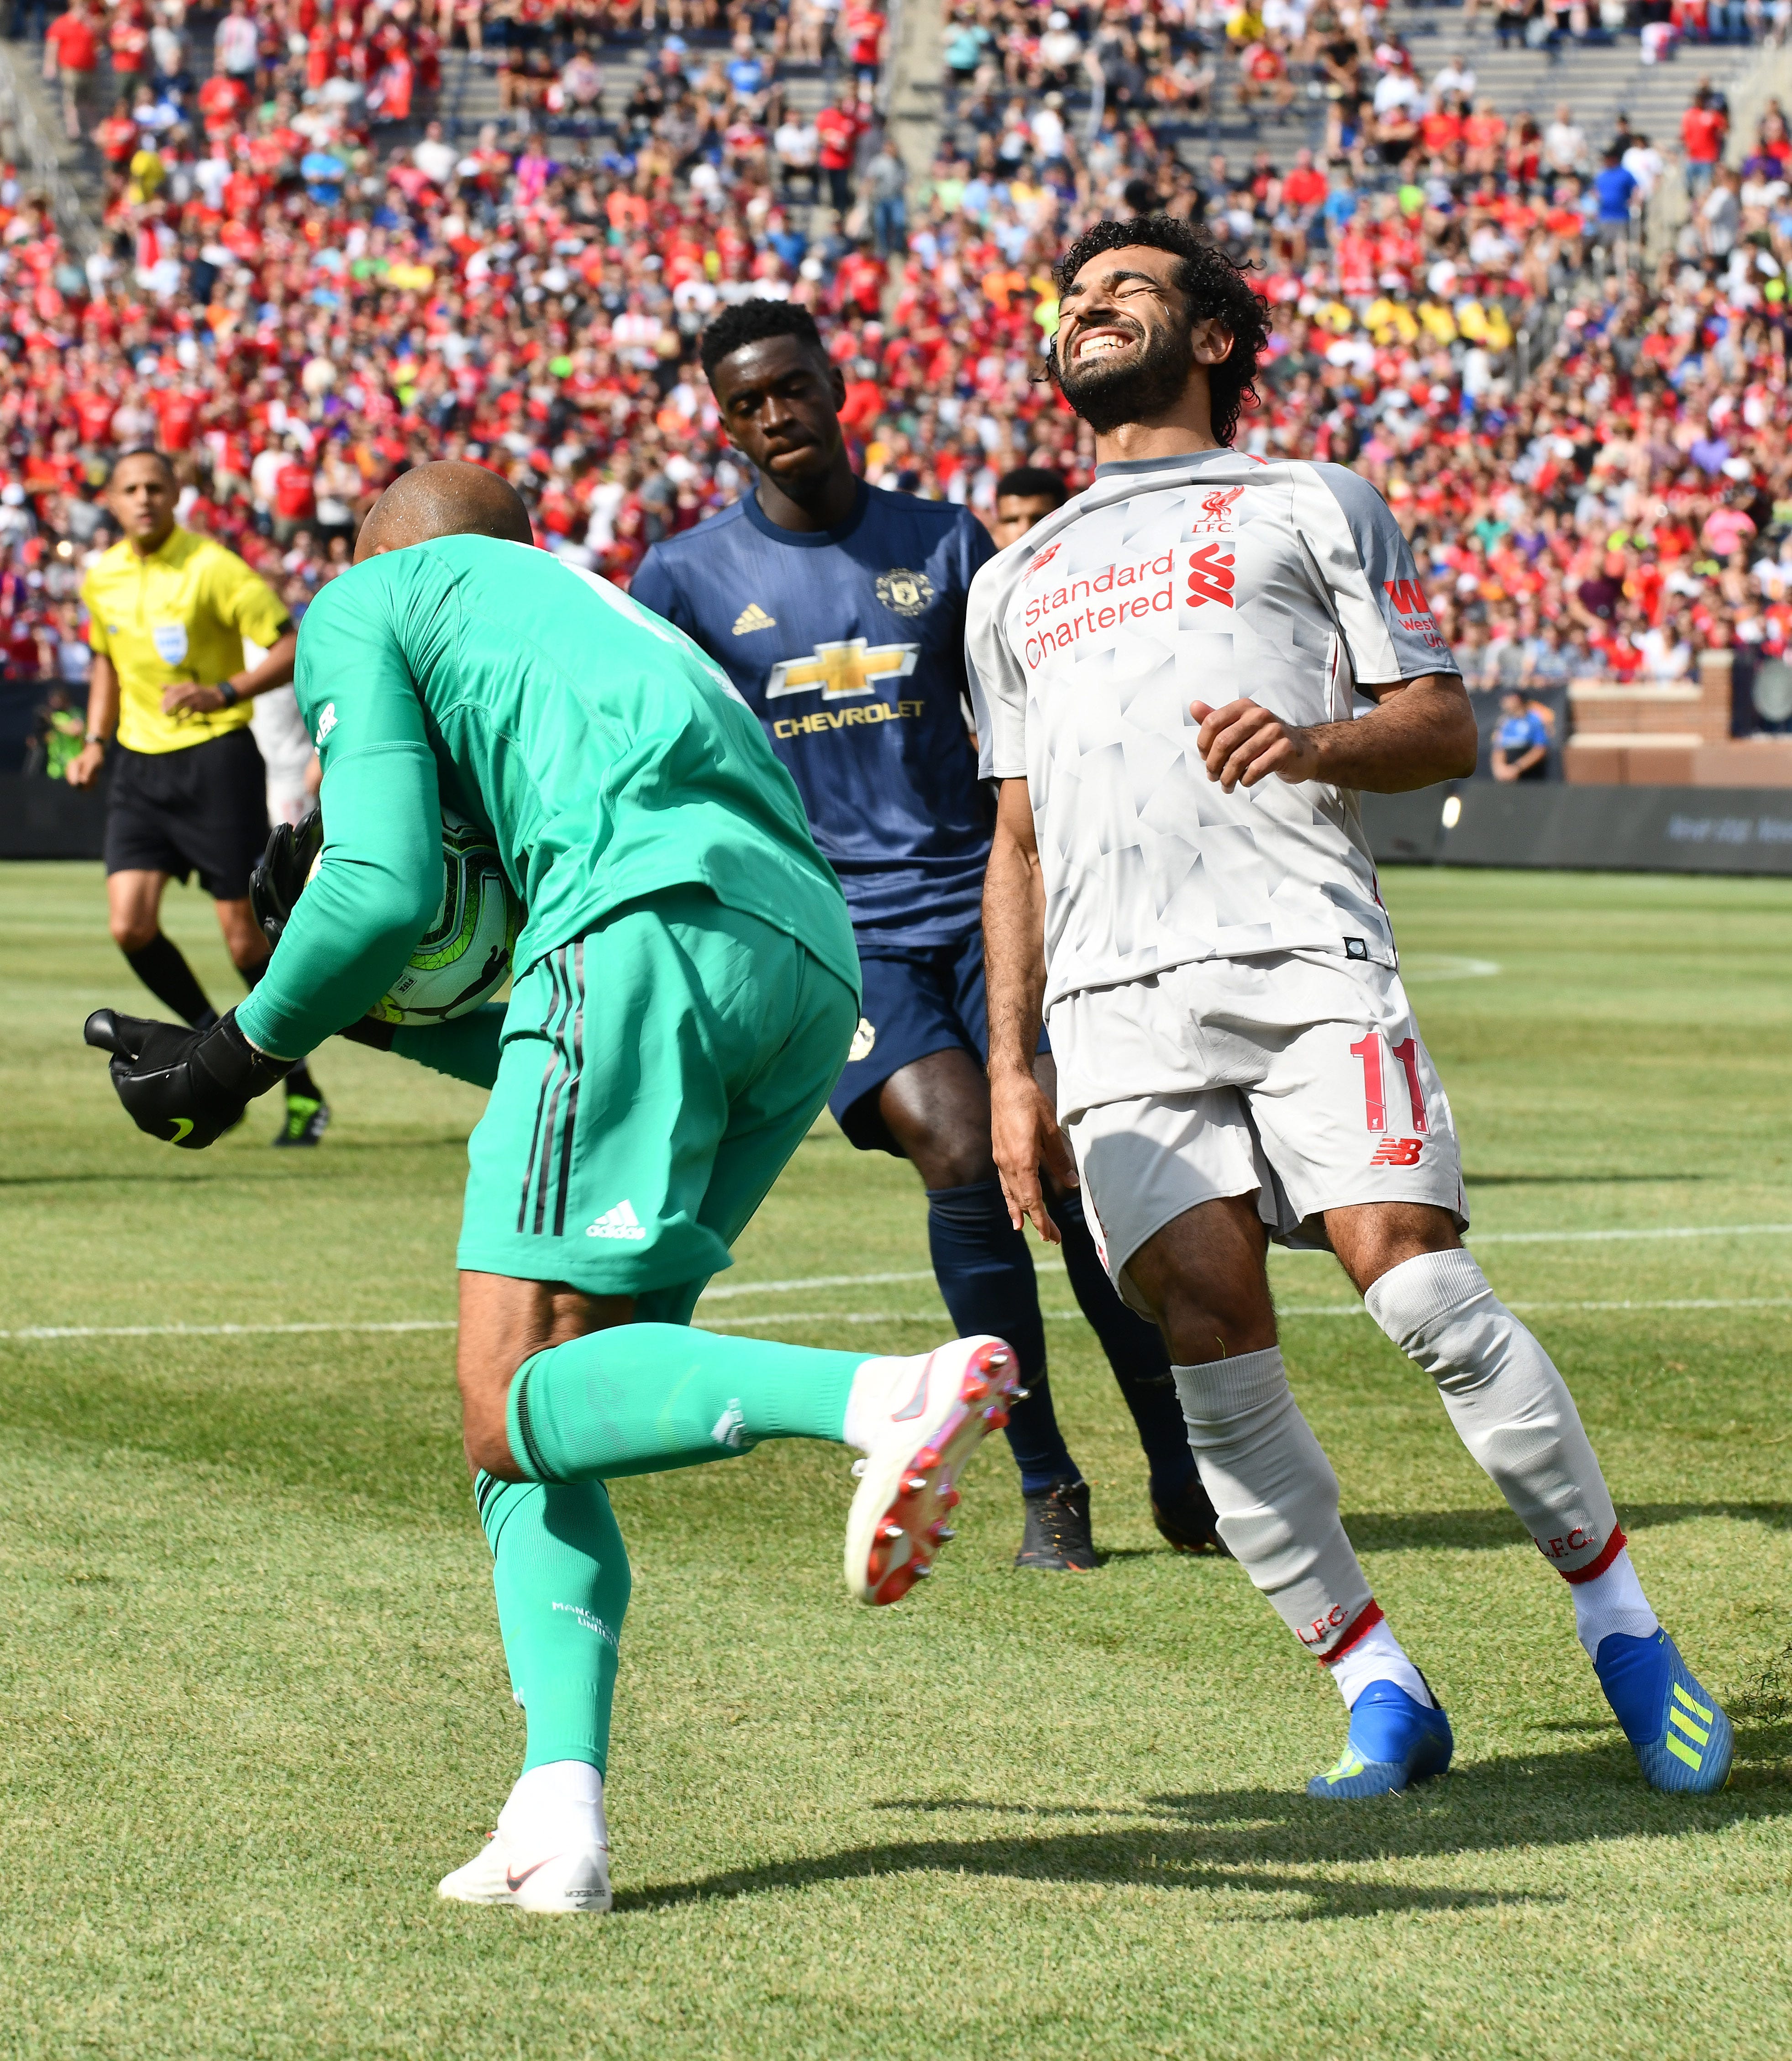 Liverpool's Mohamed Salah grimaces as Manchester goalie Lee Grant is able to scoop up a ball in front of the net before Salah could get a foot on it in the first half.